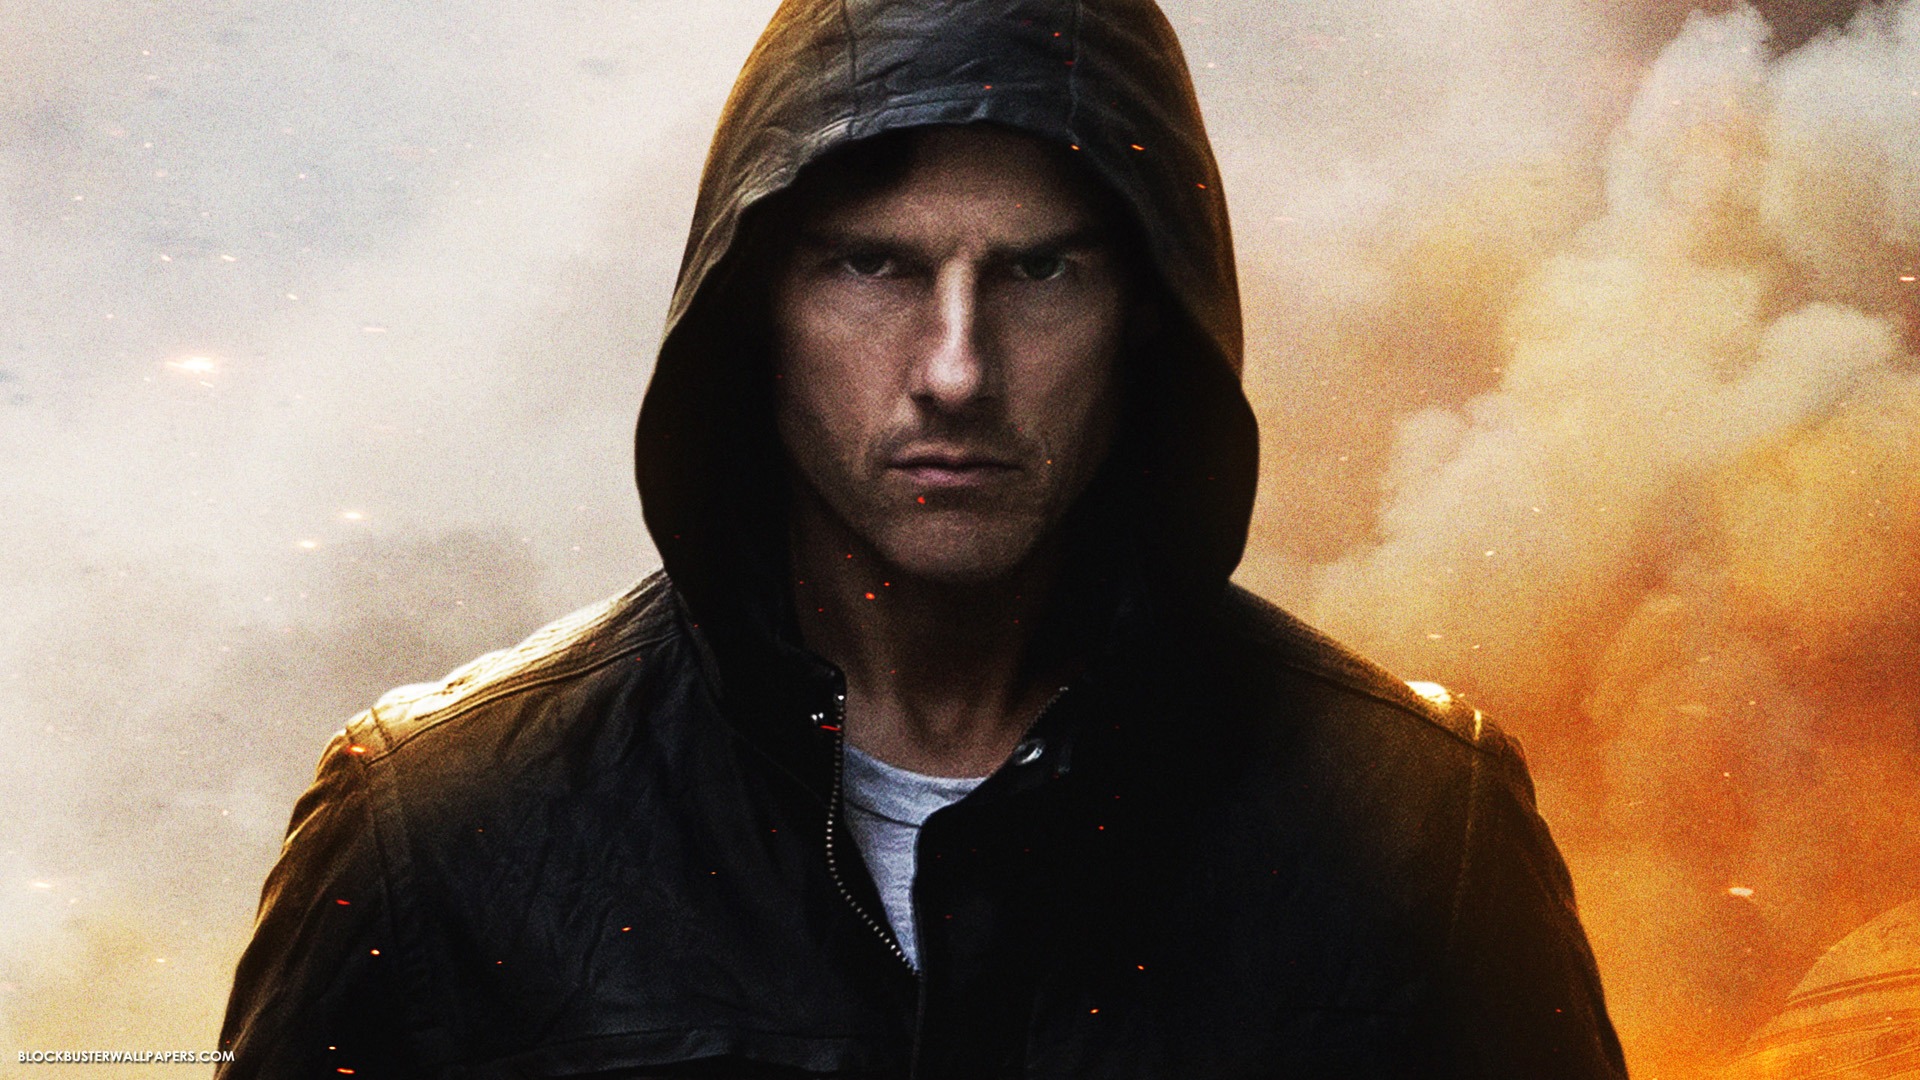 Mission: Impossible - Ghost Protocol 碟中谍4 高清壁纸3 - 1920x1080